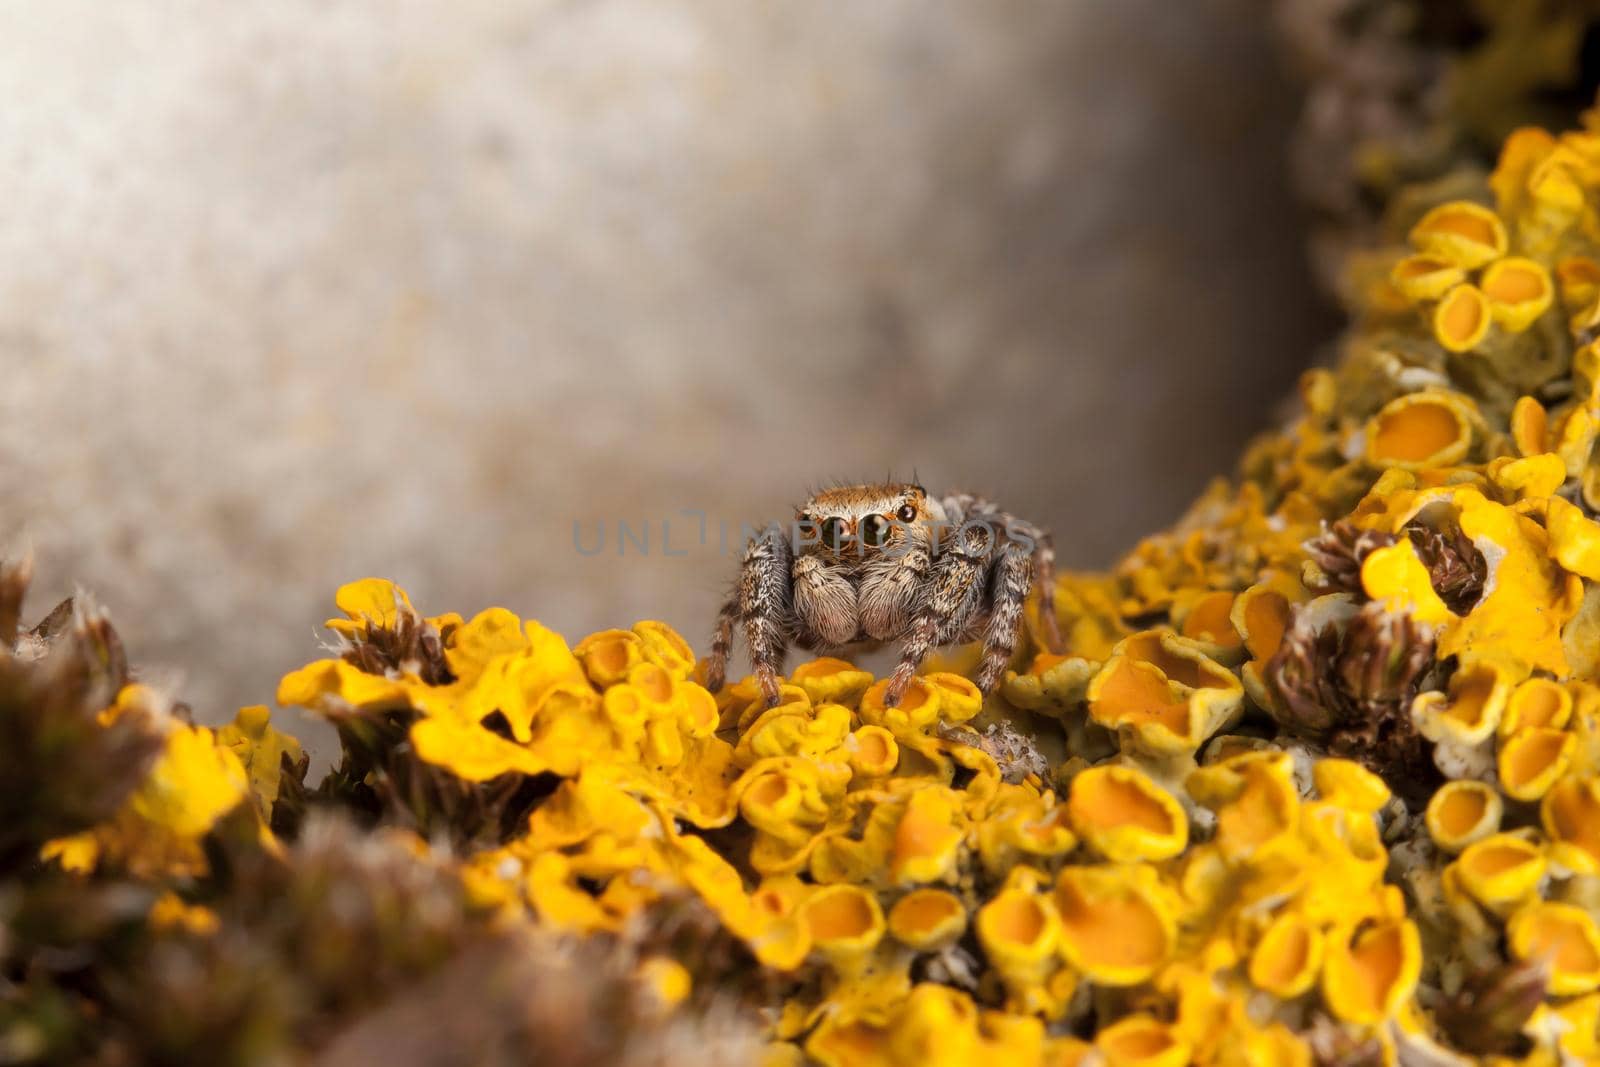 Jumping spider in yellow lichens 1 by Lincikas